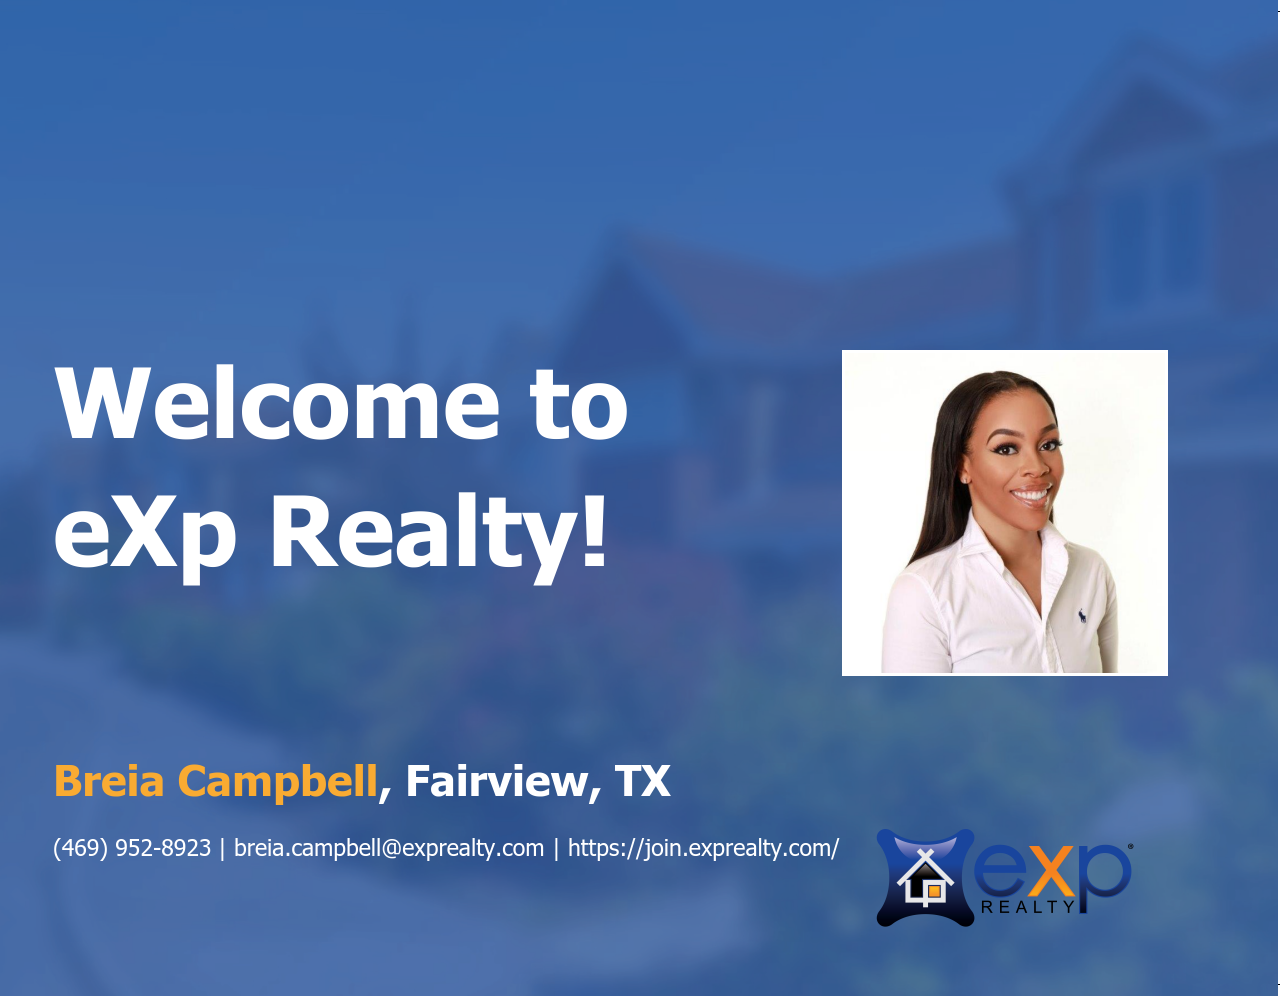 eXp Realty Welcomes Breia Campbell!